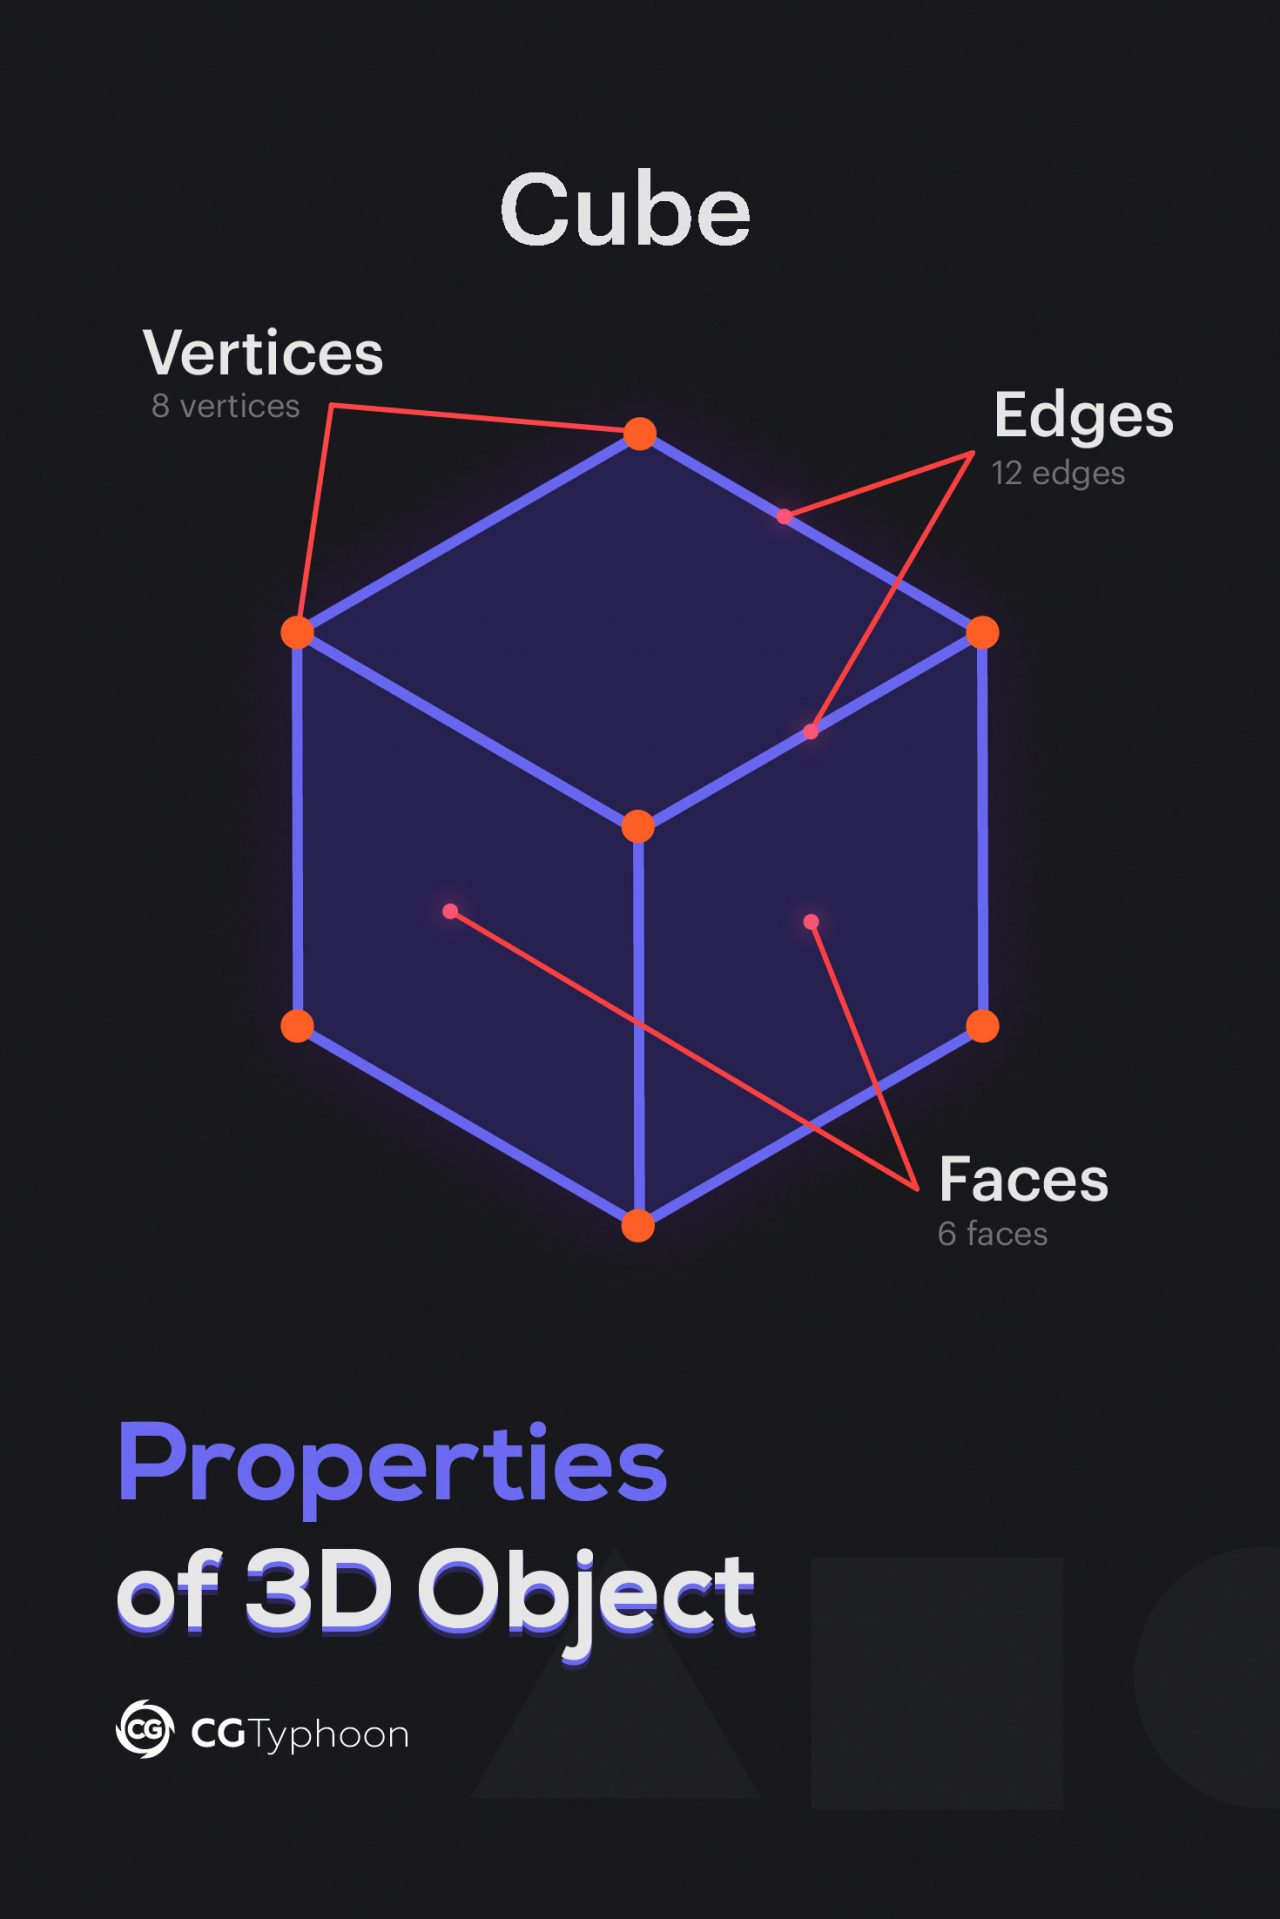 vertices-edges-and-faces-of-3d-object-cgtyphoon